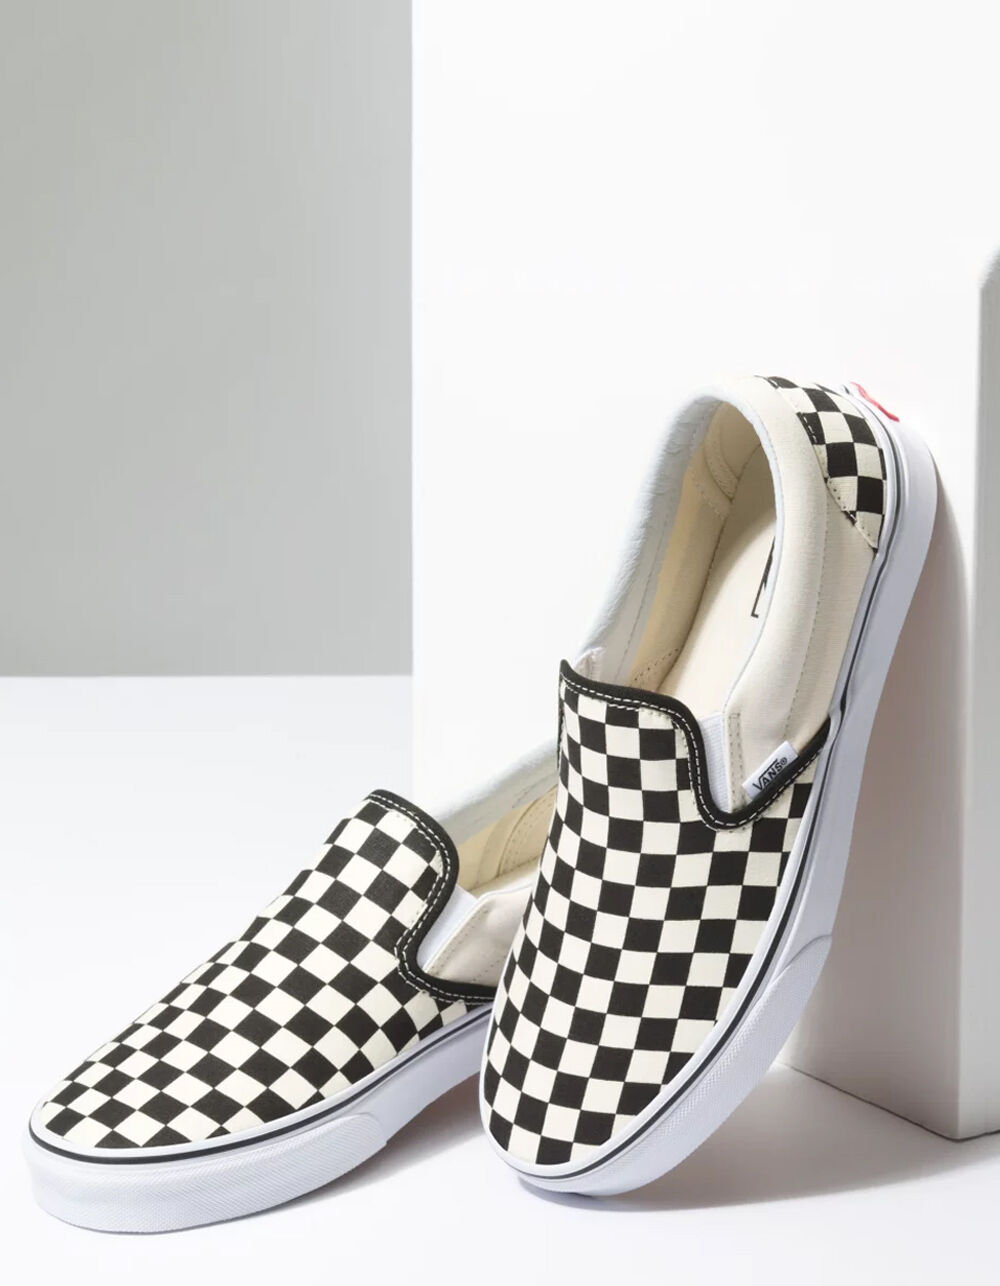 VANS Checkerboard Slip-On Black & Off White Shoes - CHECKERBOARD | Tillys